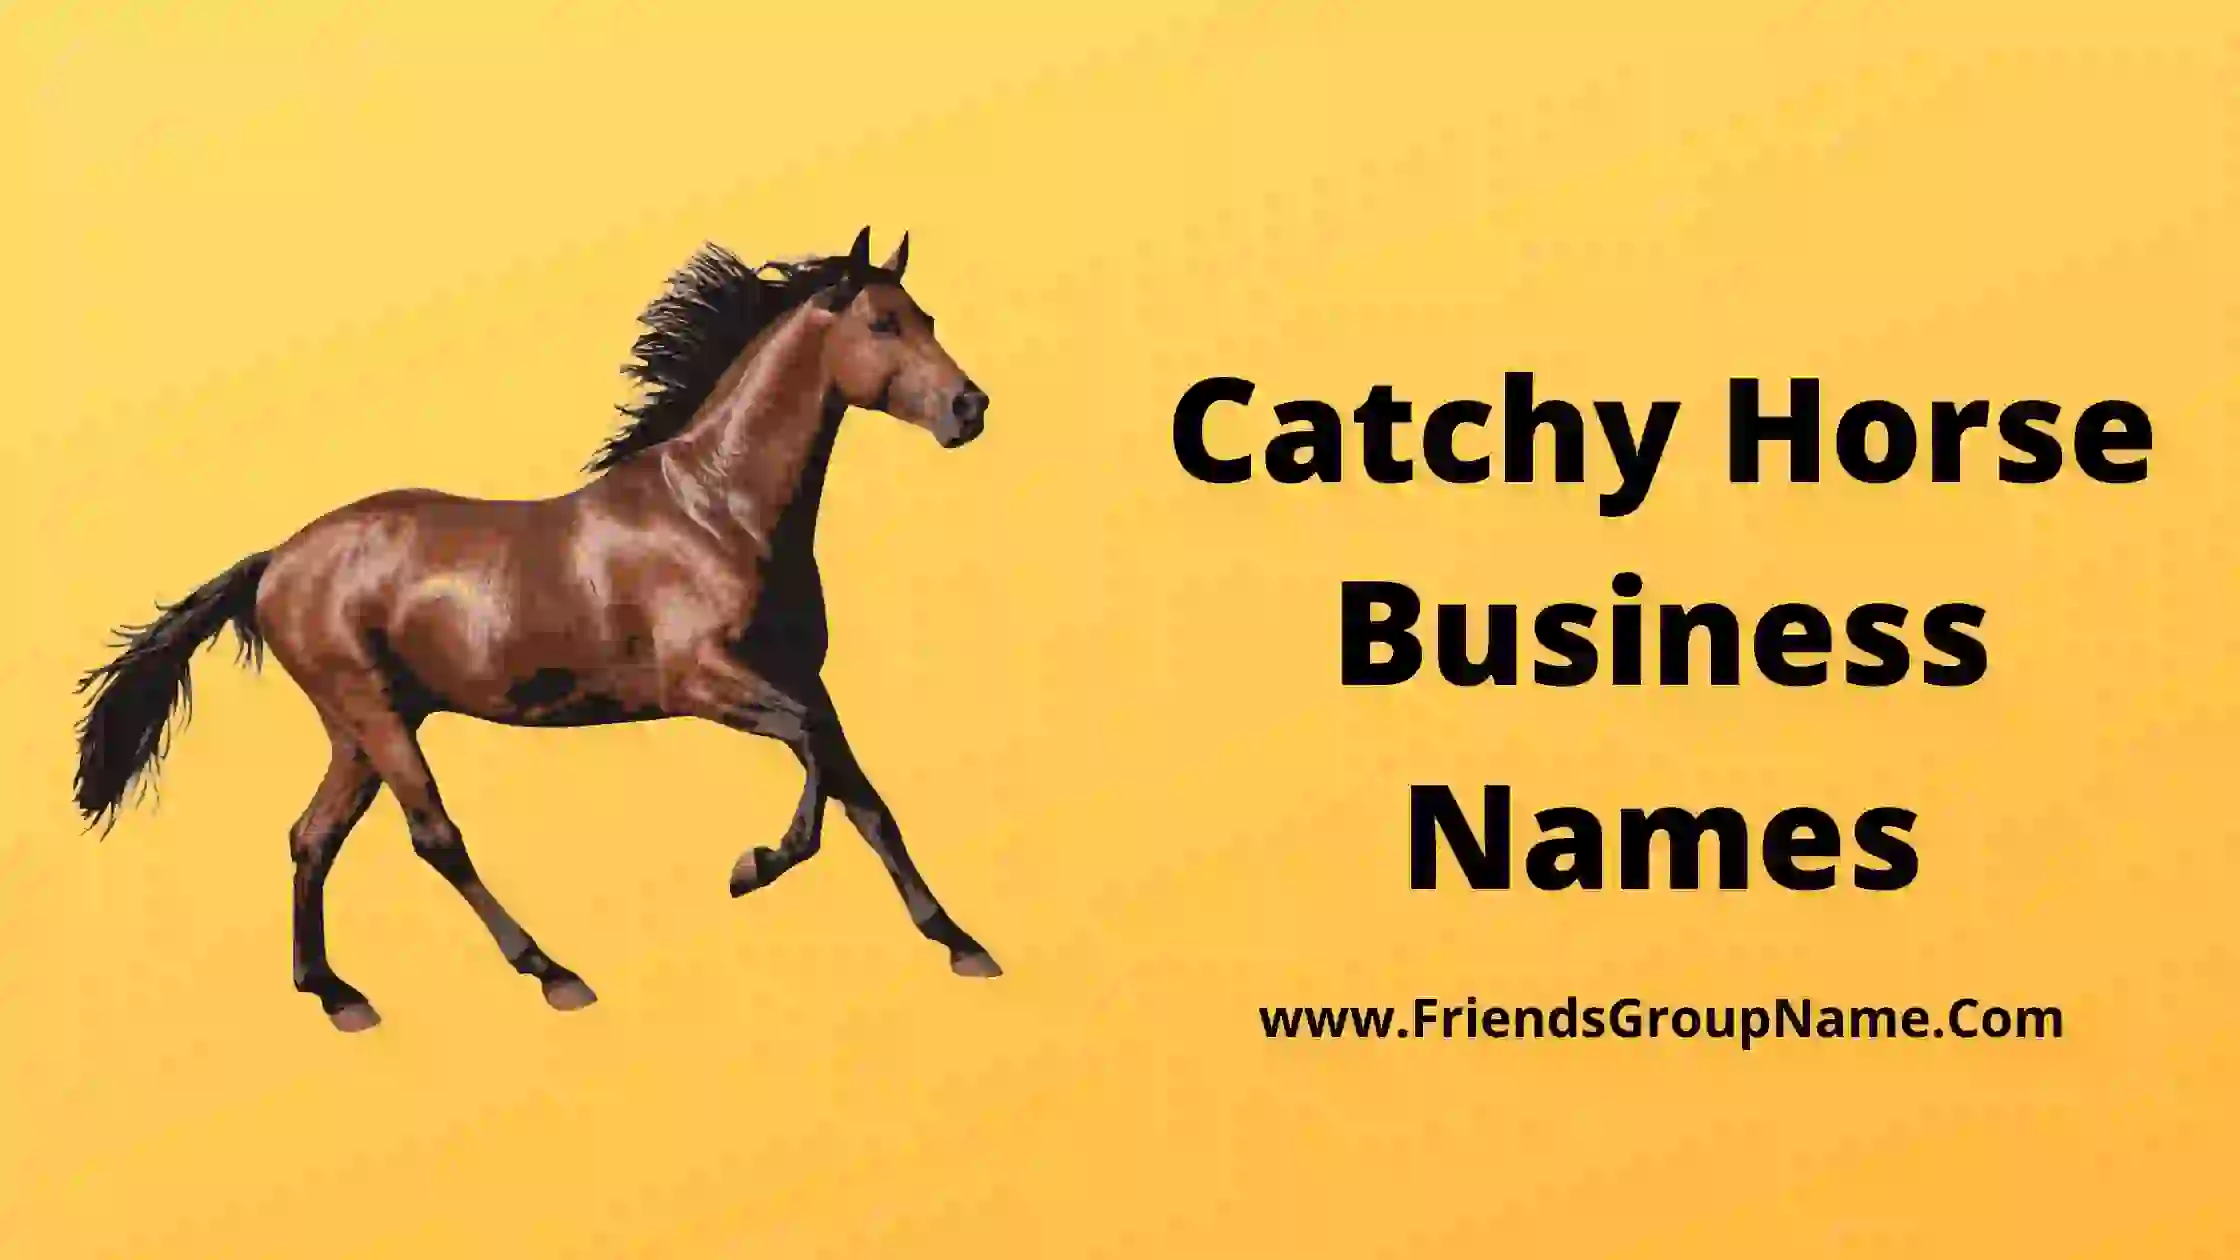 Catchy Horse Business Names